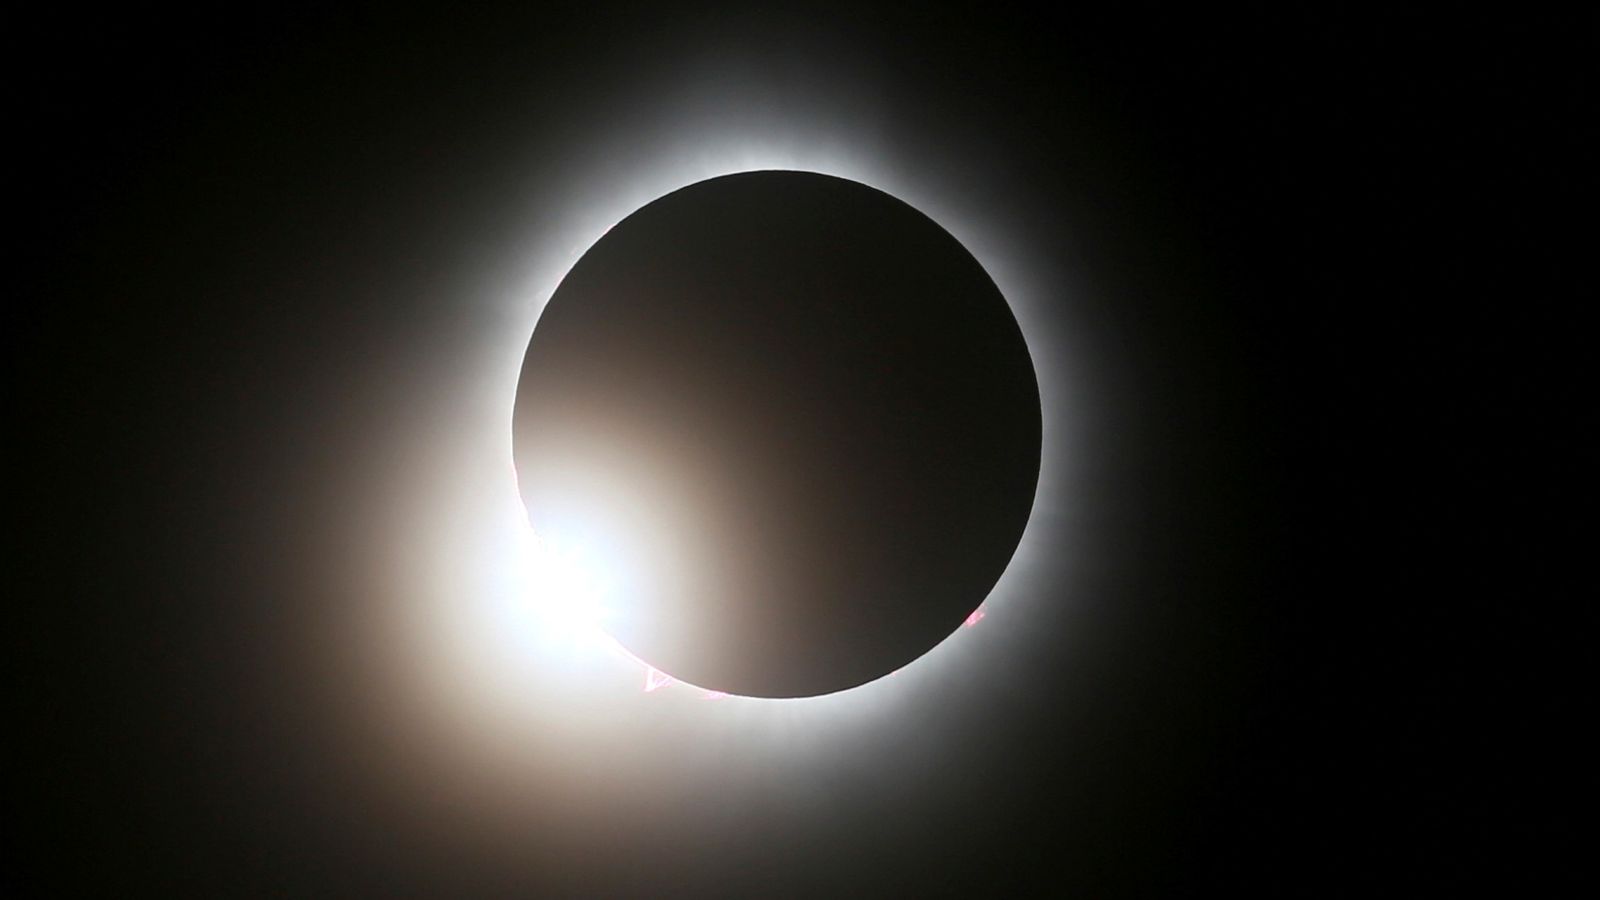 Where and when you can see the next total solar eclipse | Science & Tech News